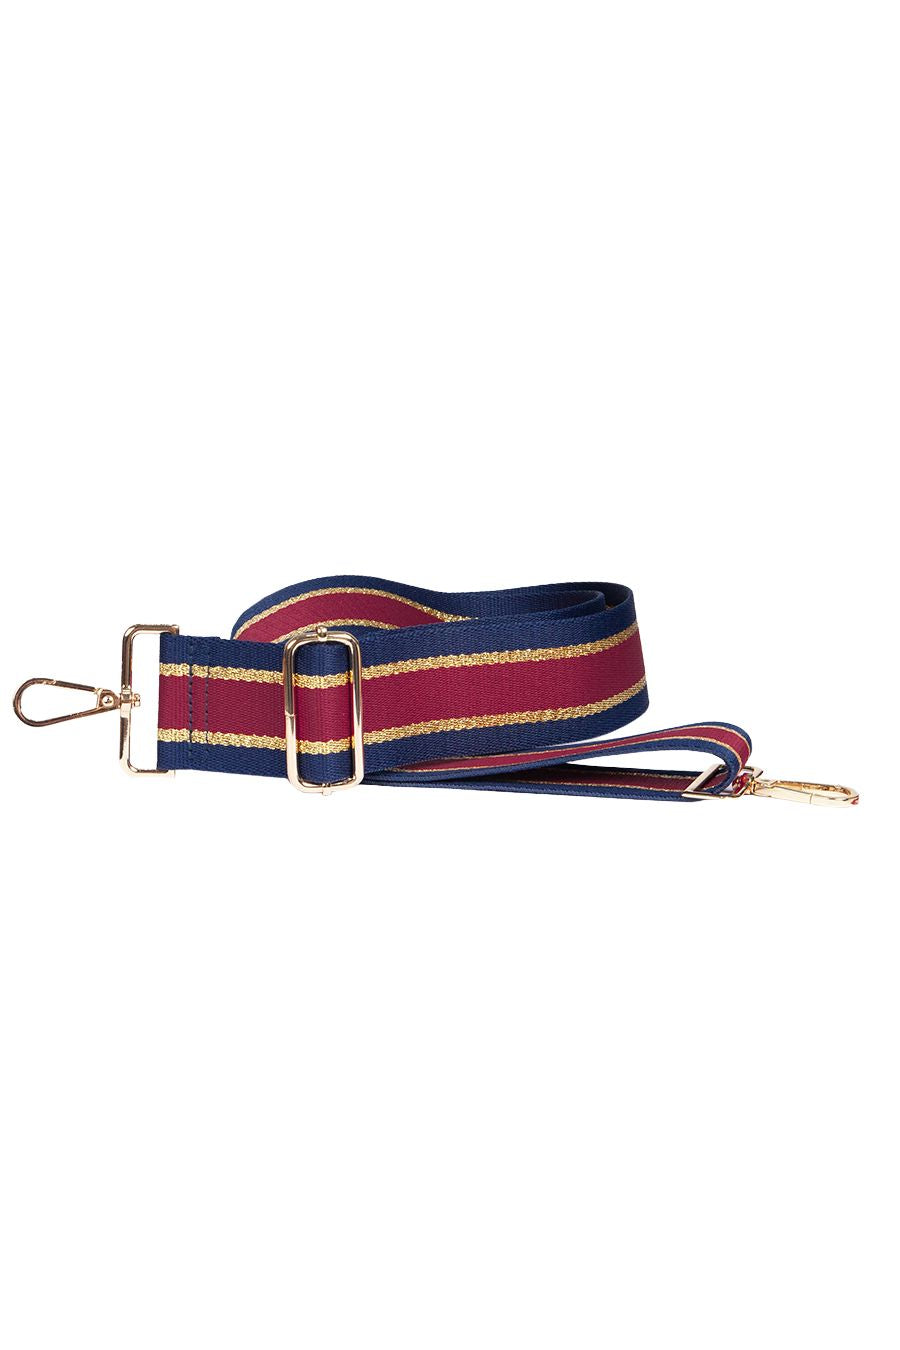 Navy Blue Red Striped Bag Strap With Glitter